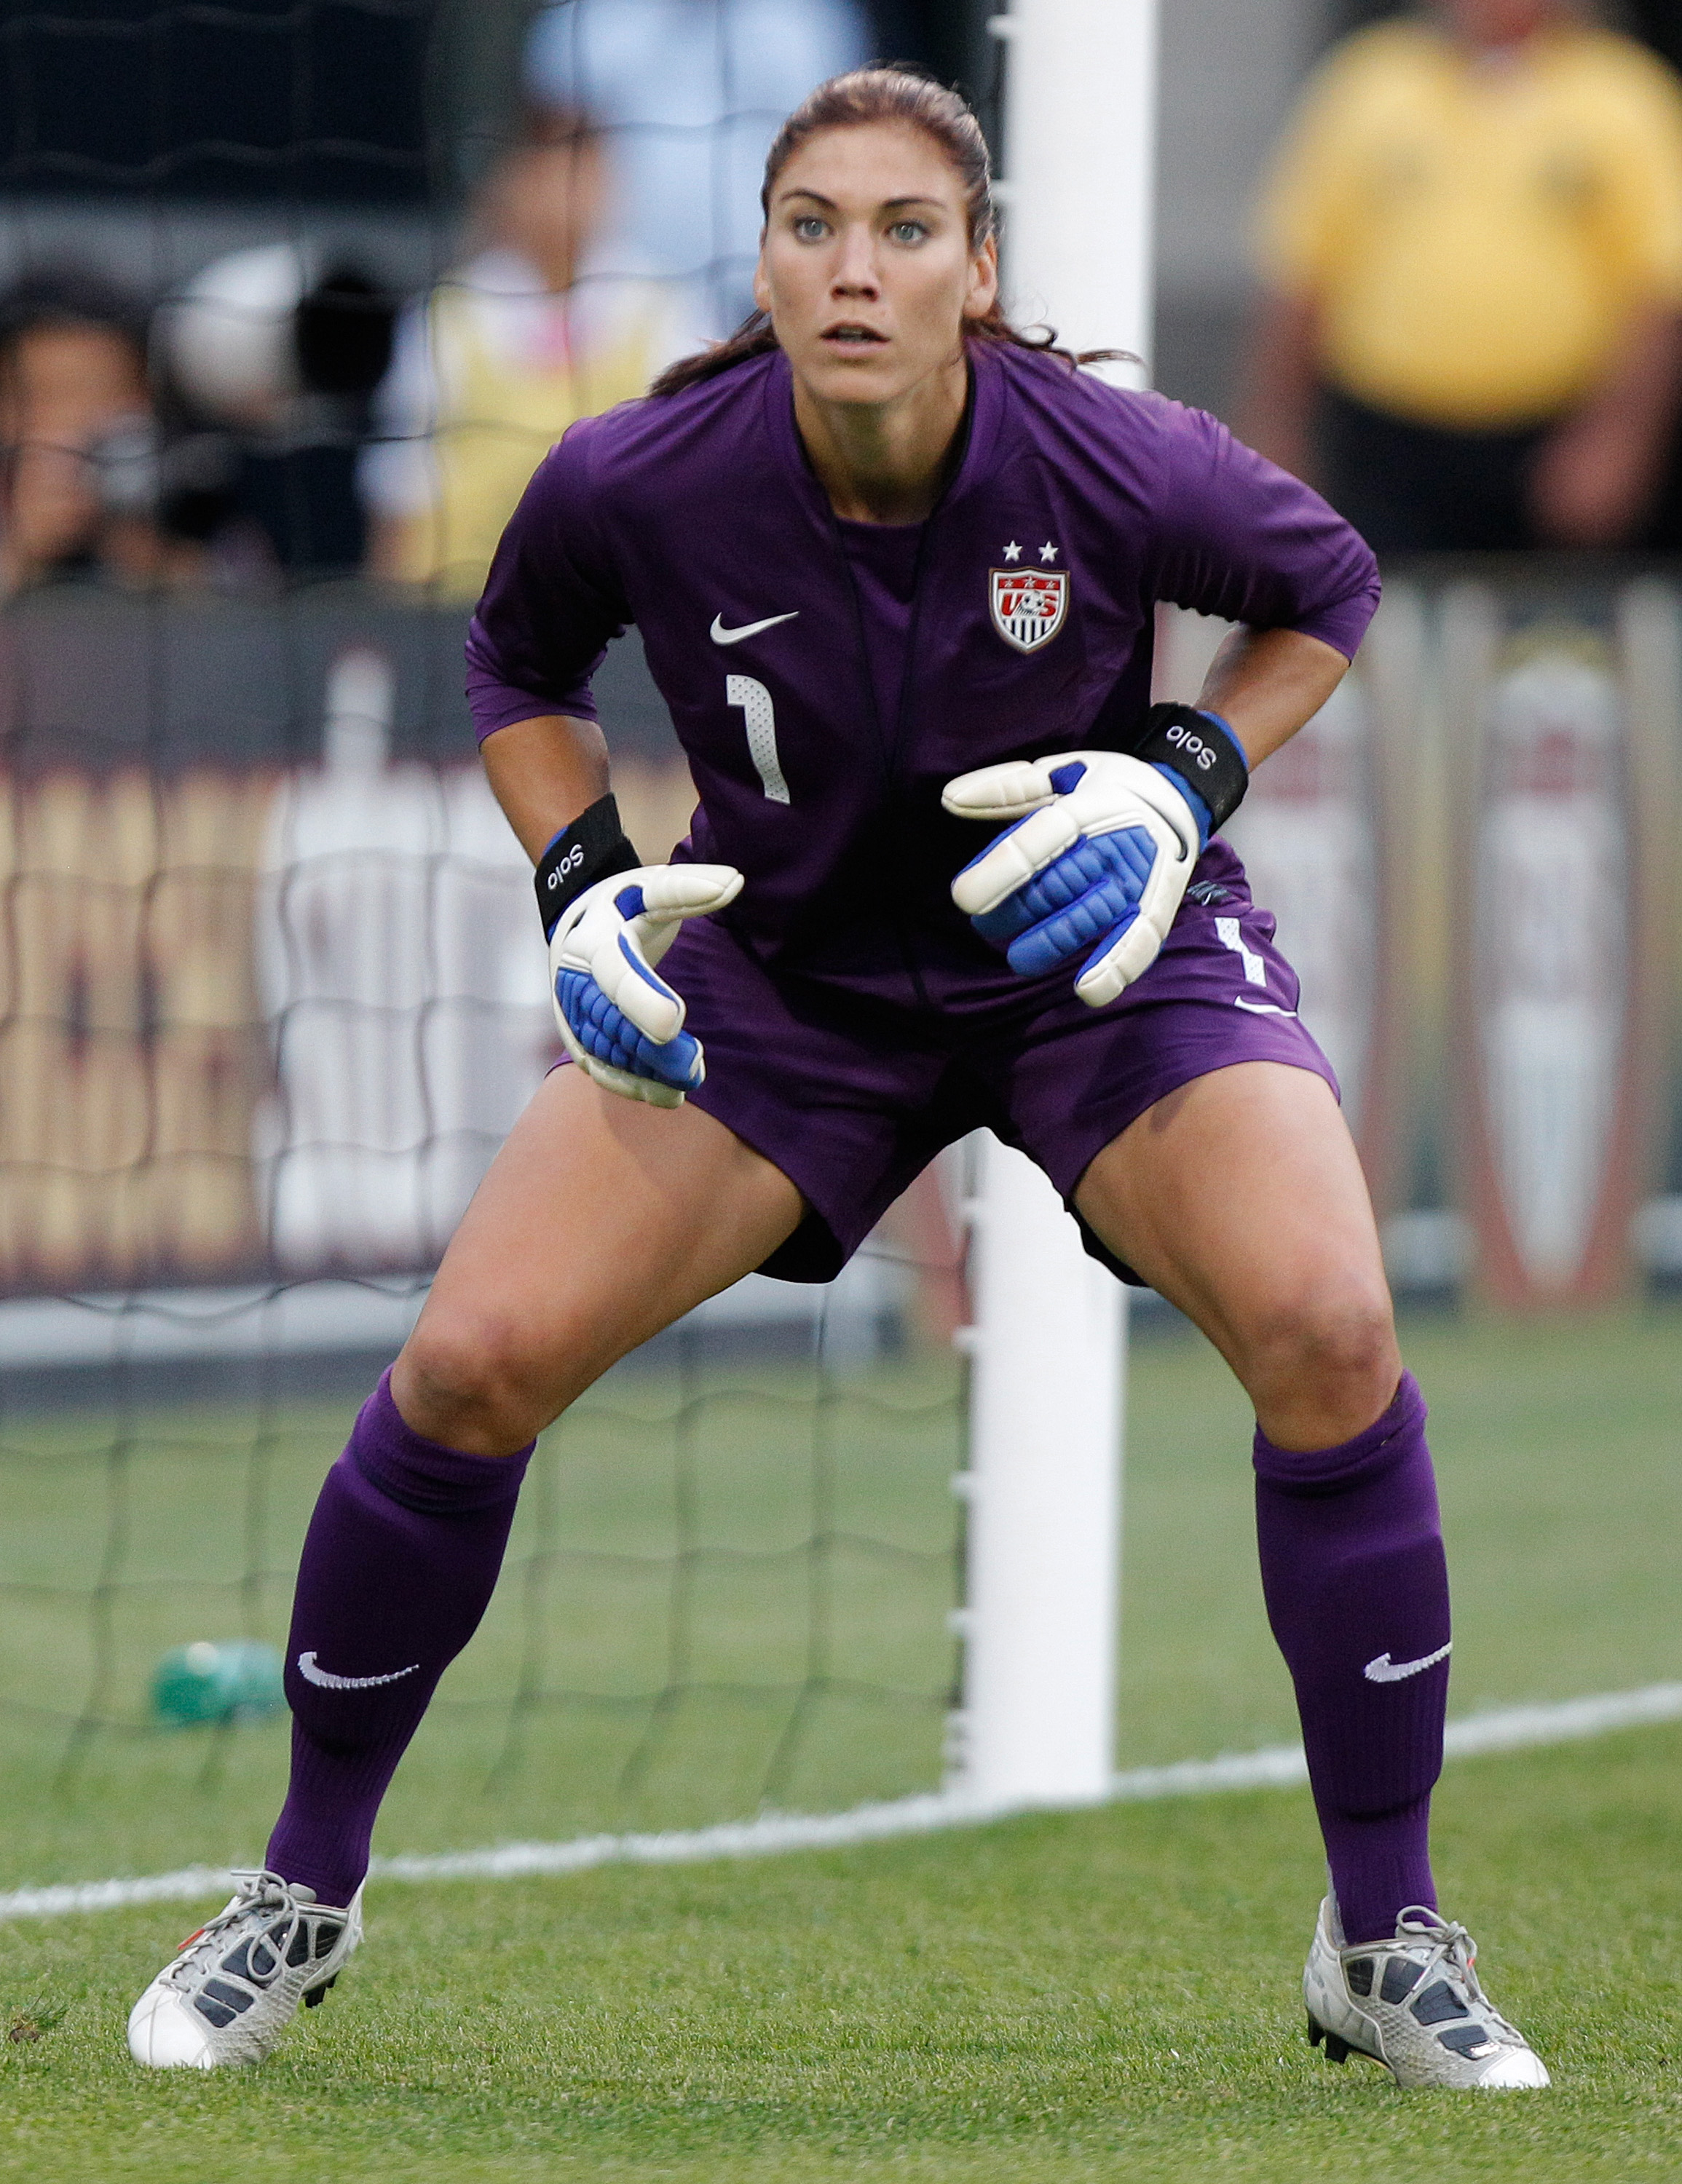 Topless hope solo Hope Solo